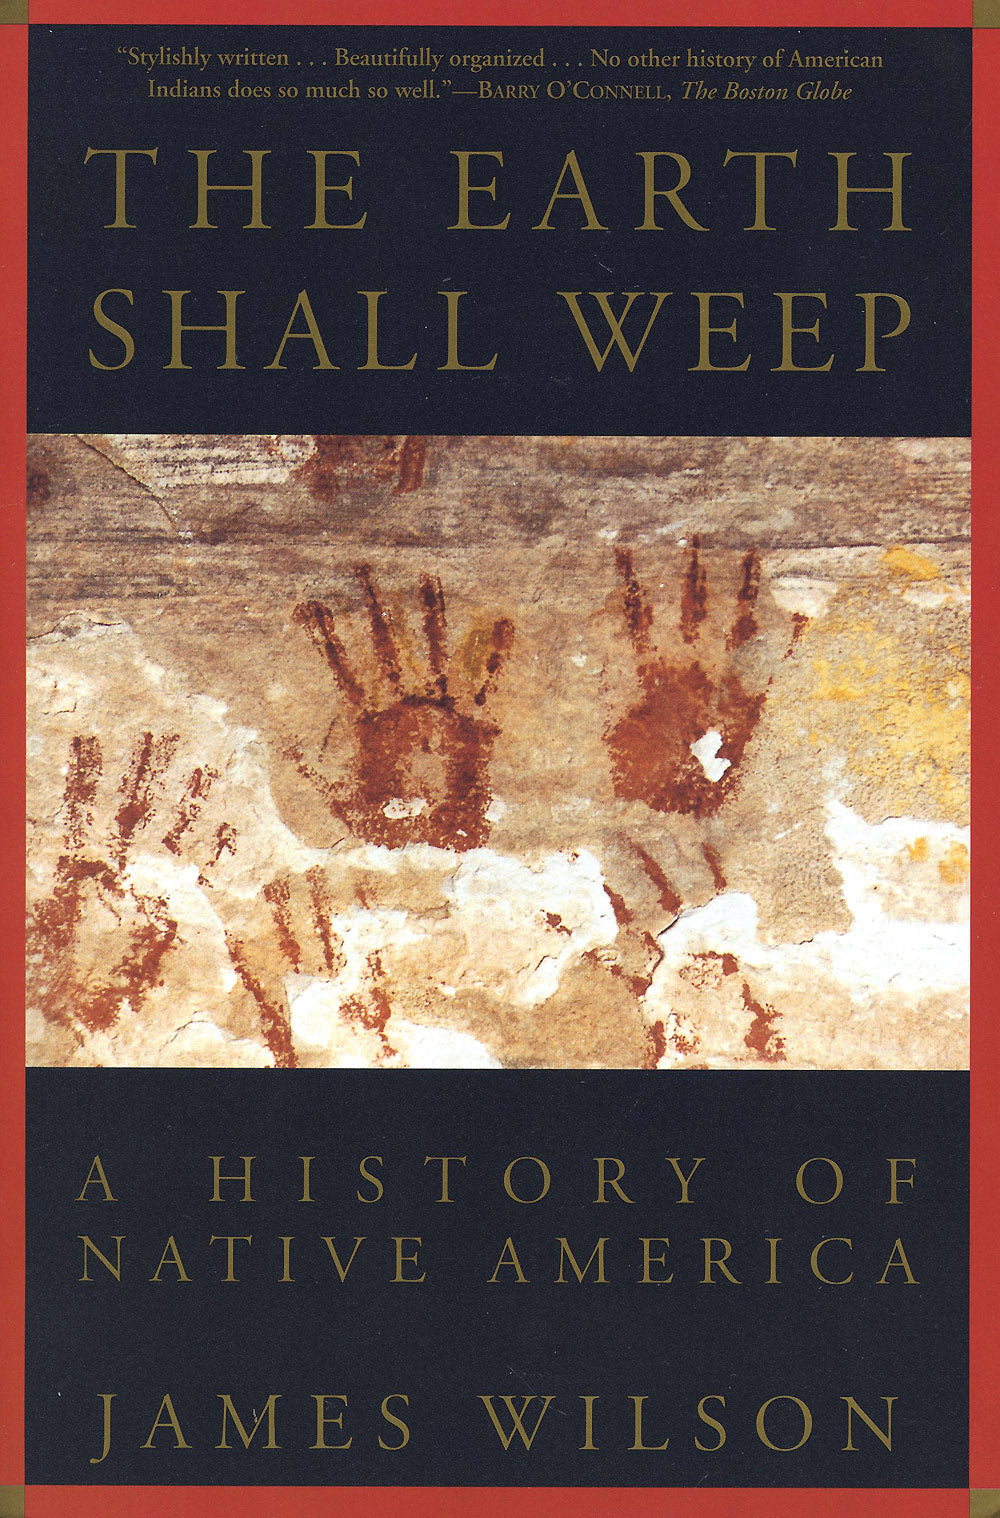 The Earth Shall Weep - A History of Native America